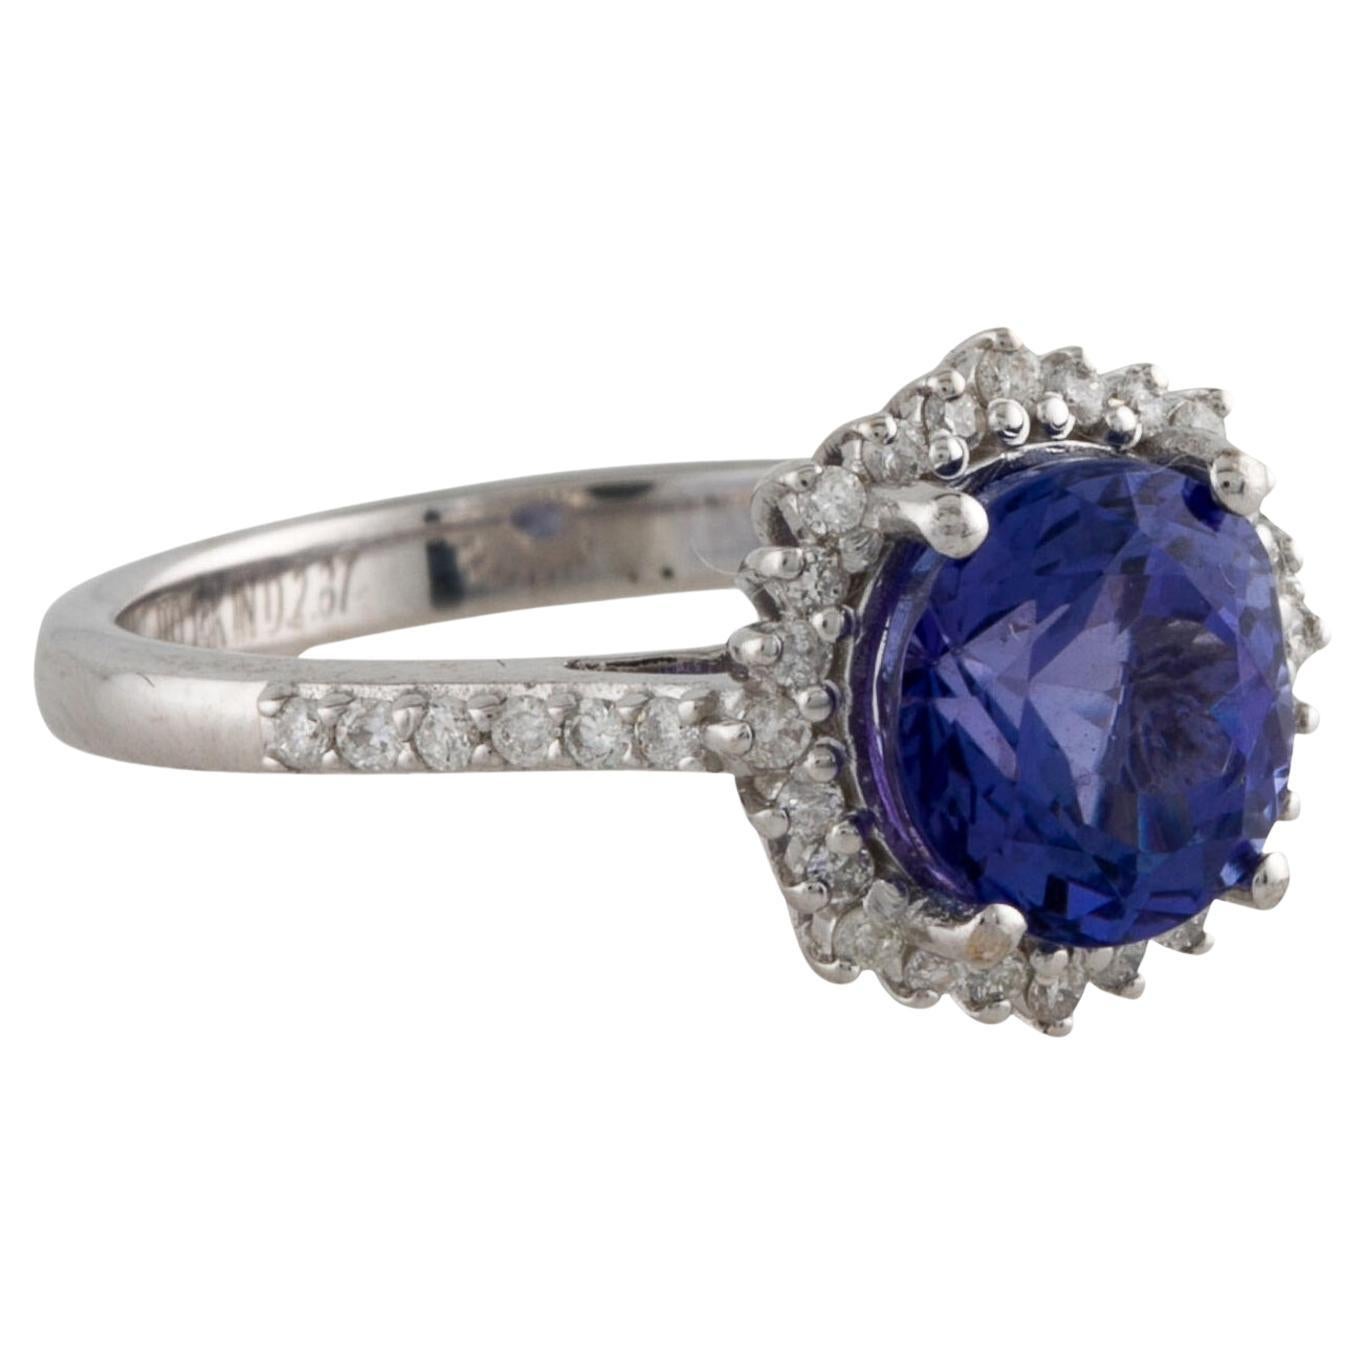 Luxurious 14K White Gold Tanzanite & Diamond Cocktail Ring, 2.25ct Round Faceted For Sale